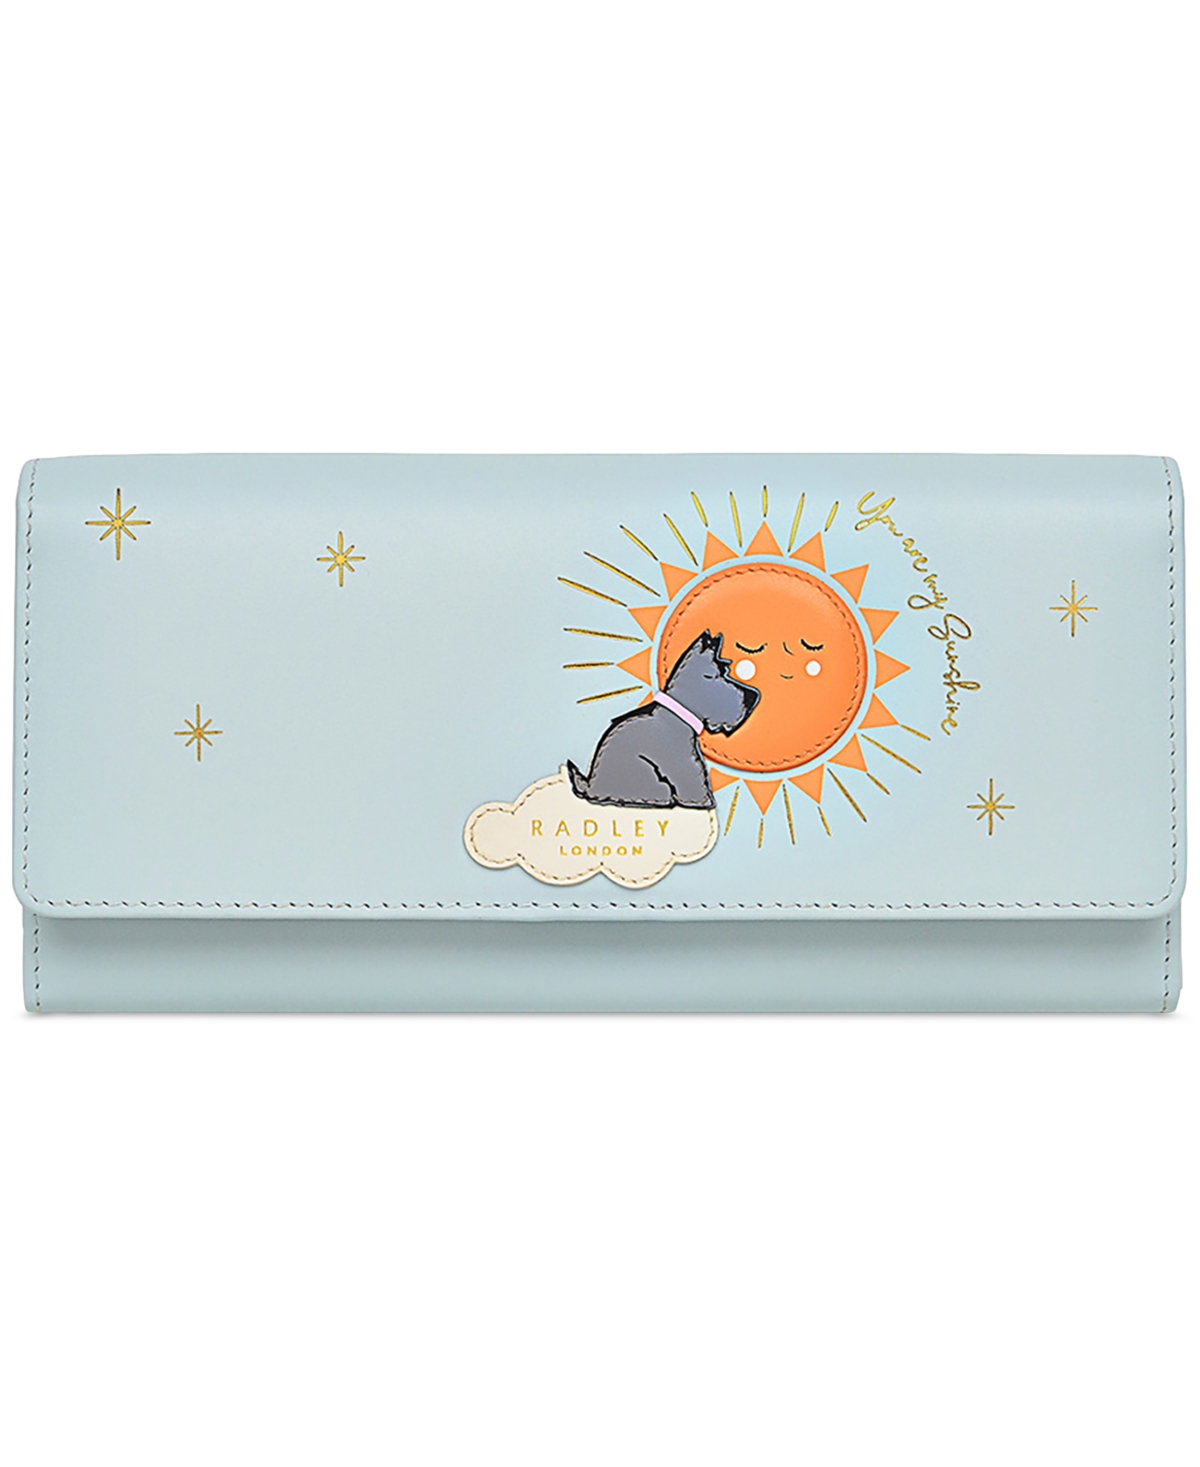 Radley London You Are My Sunshine Large Flapover Wallet In Soft Blue